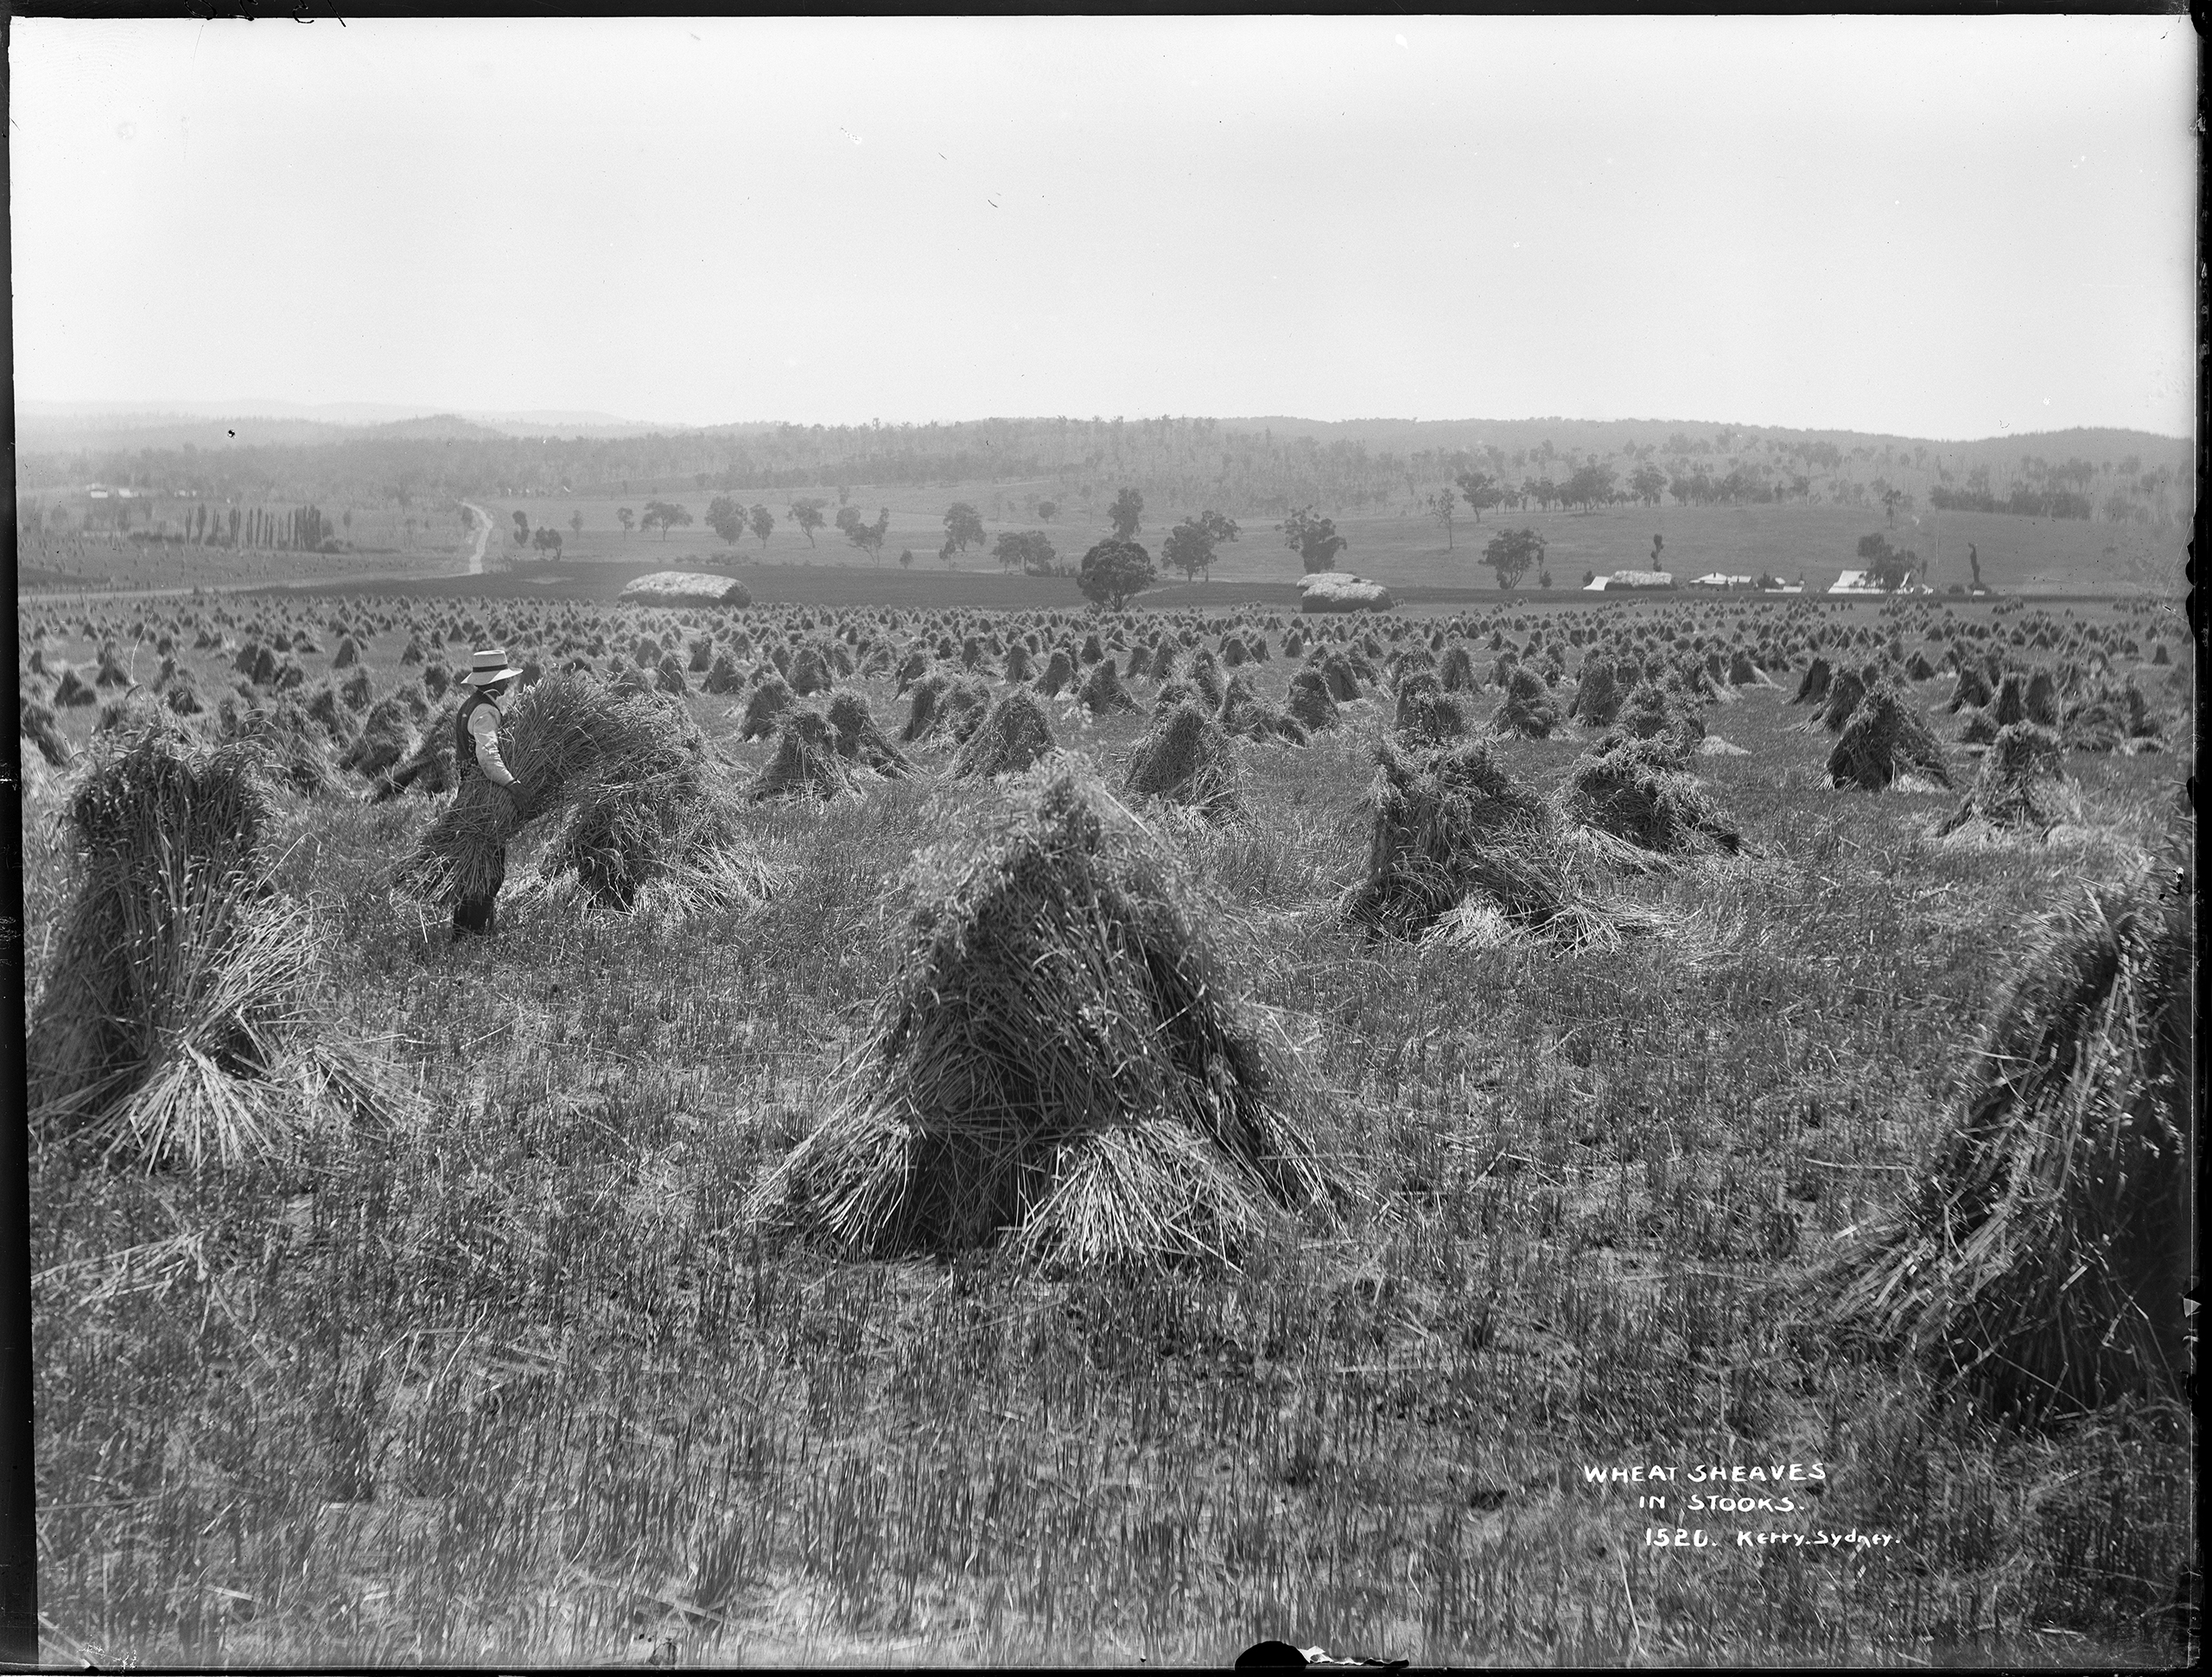 'Wheat Sheaves in Stooks' by Kerry and Co from the Tyrrell Collection